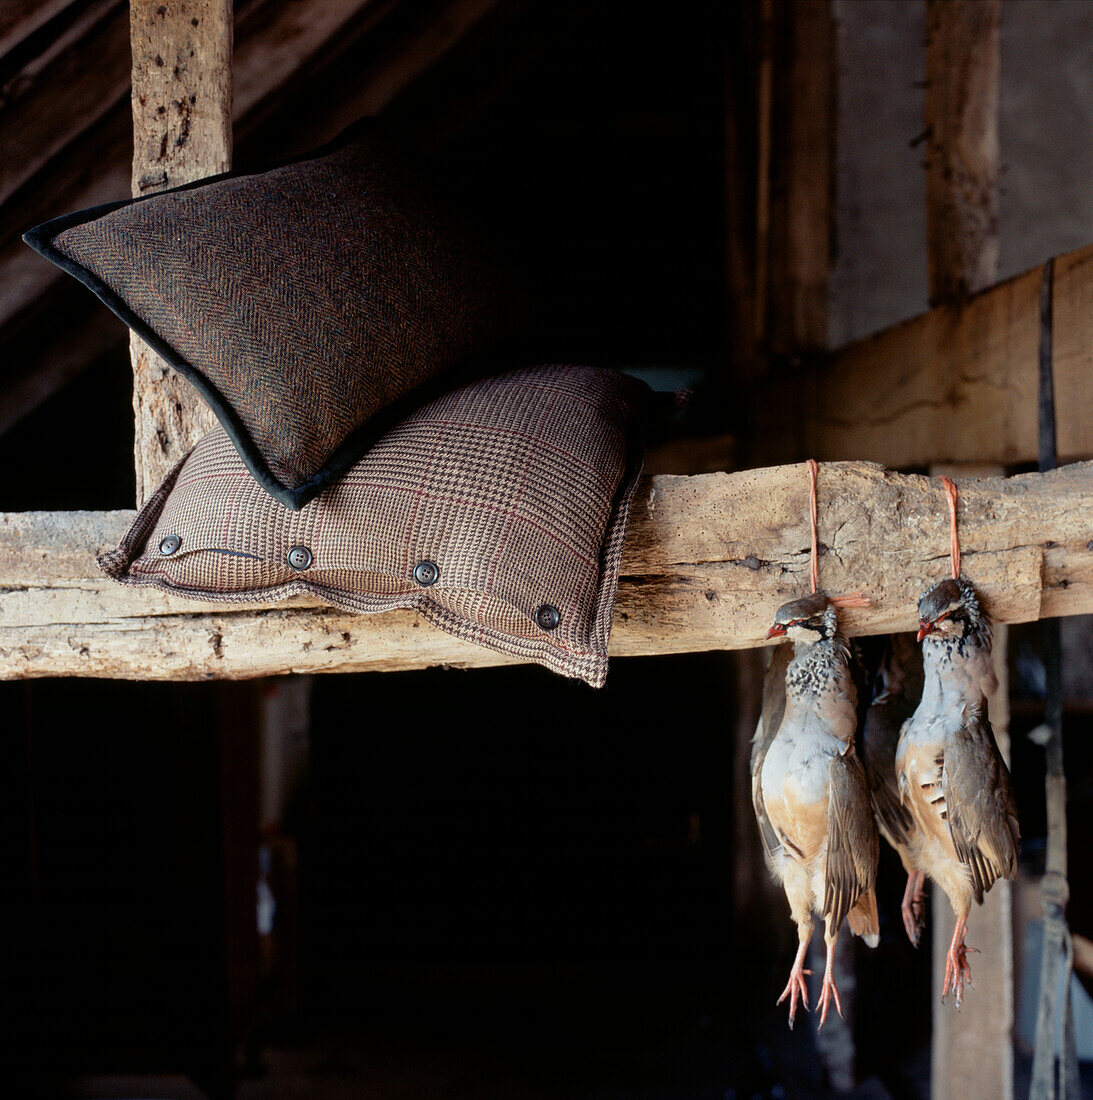 Two dead partridges hanging in an old wooden barn